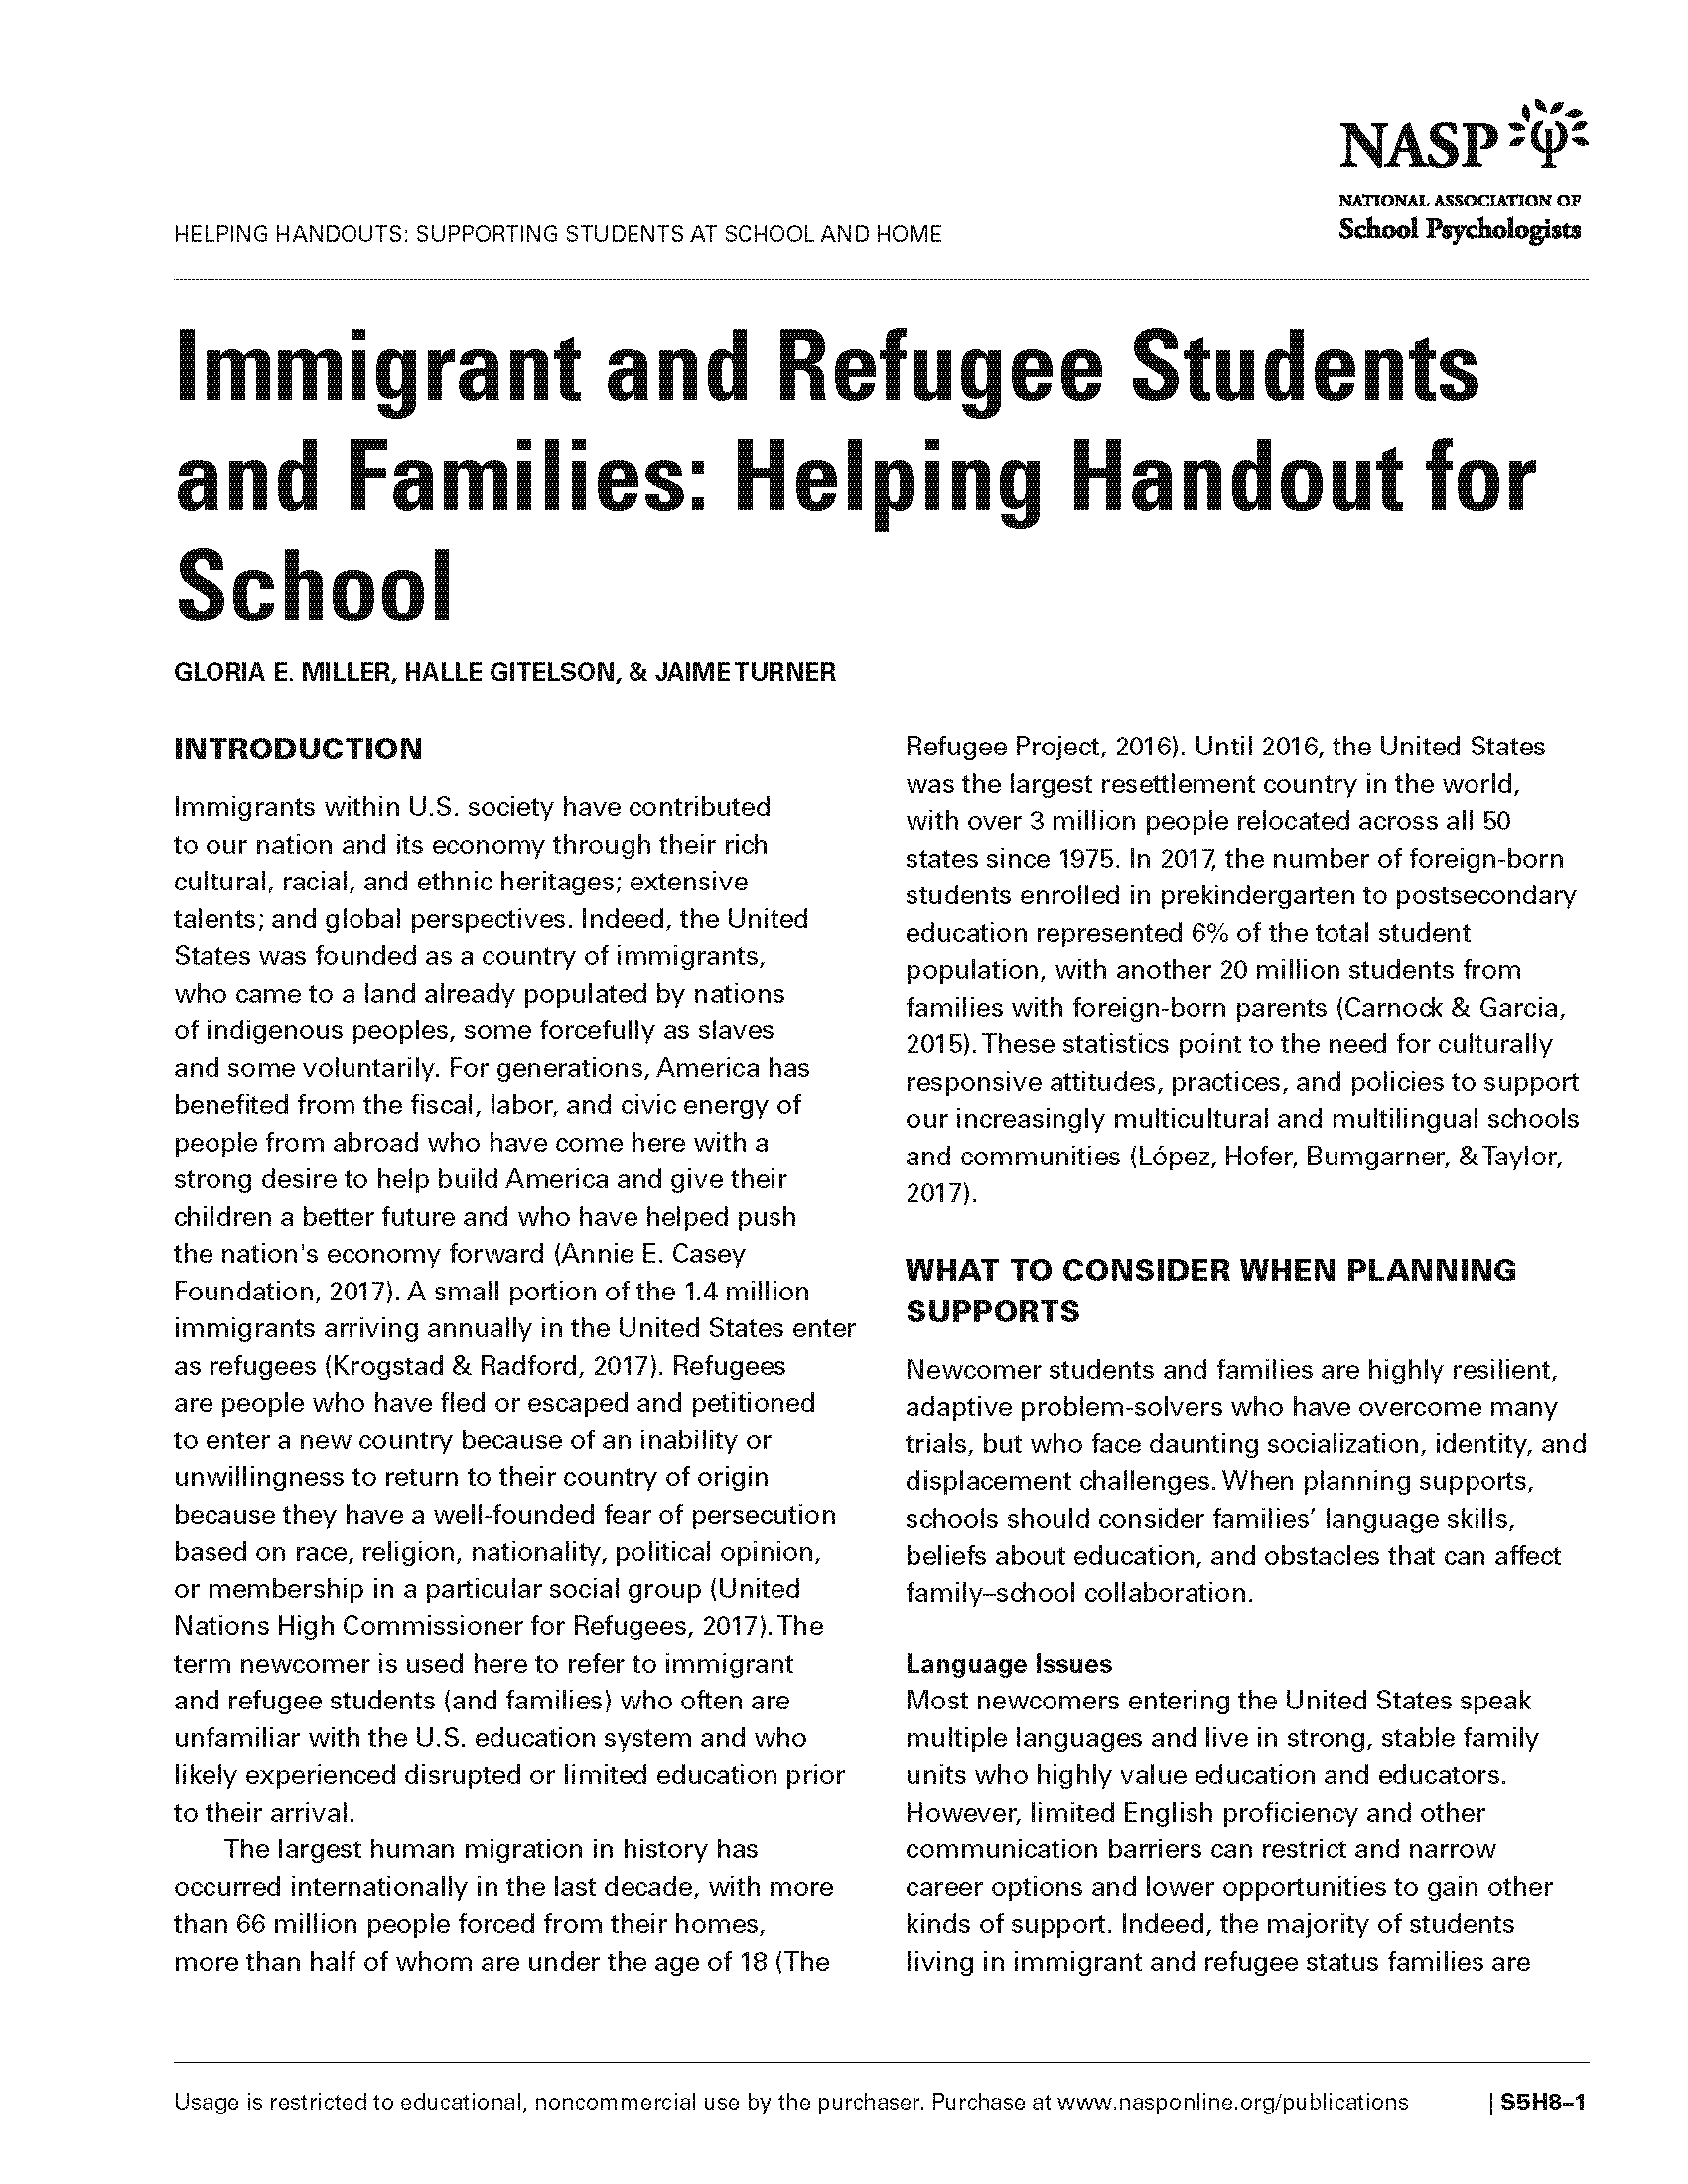 Immigrant and Refugee Students and Families: Helping Handout for School